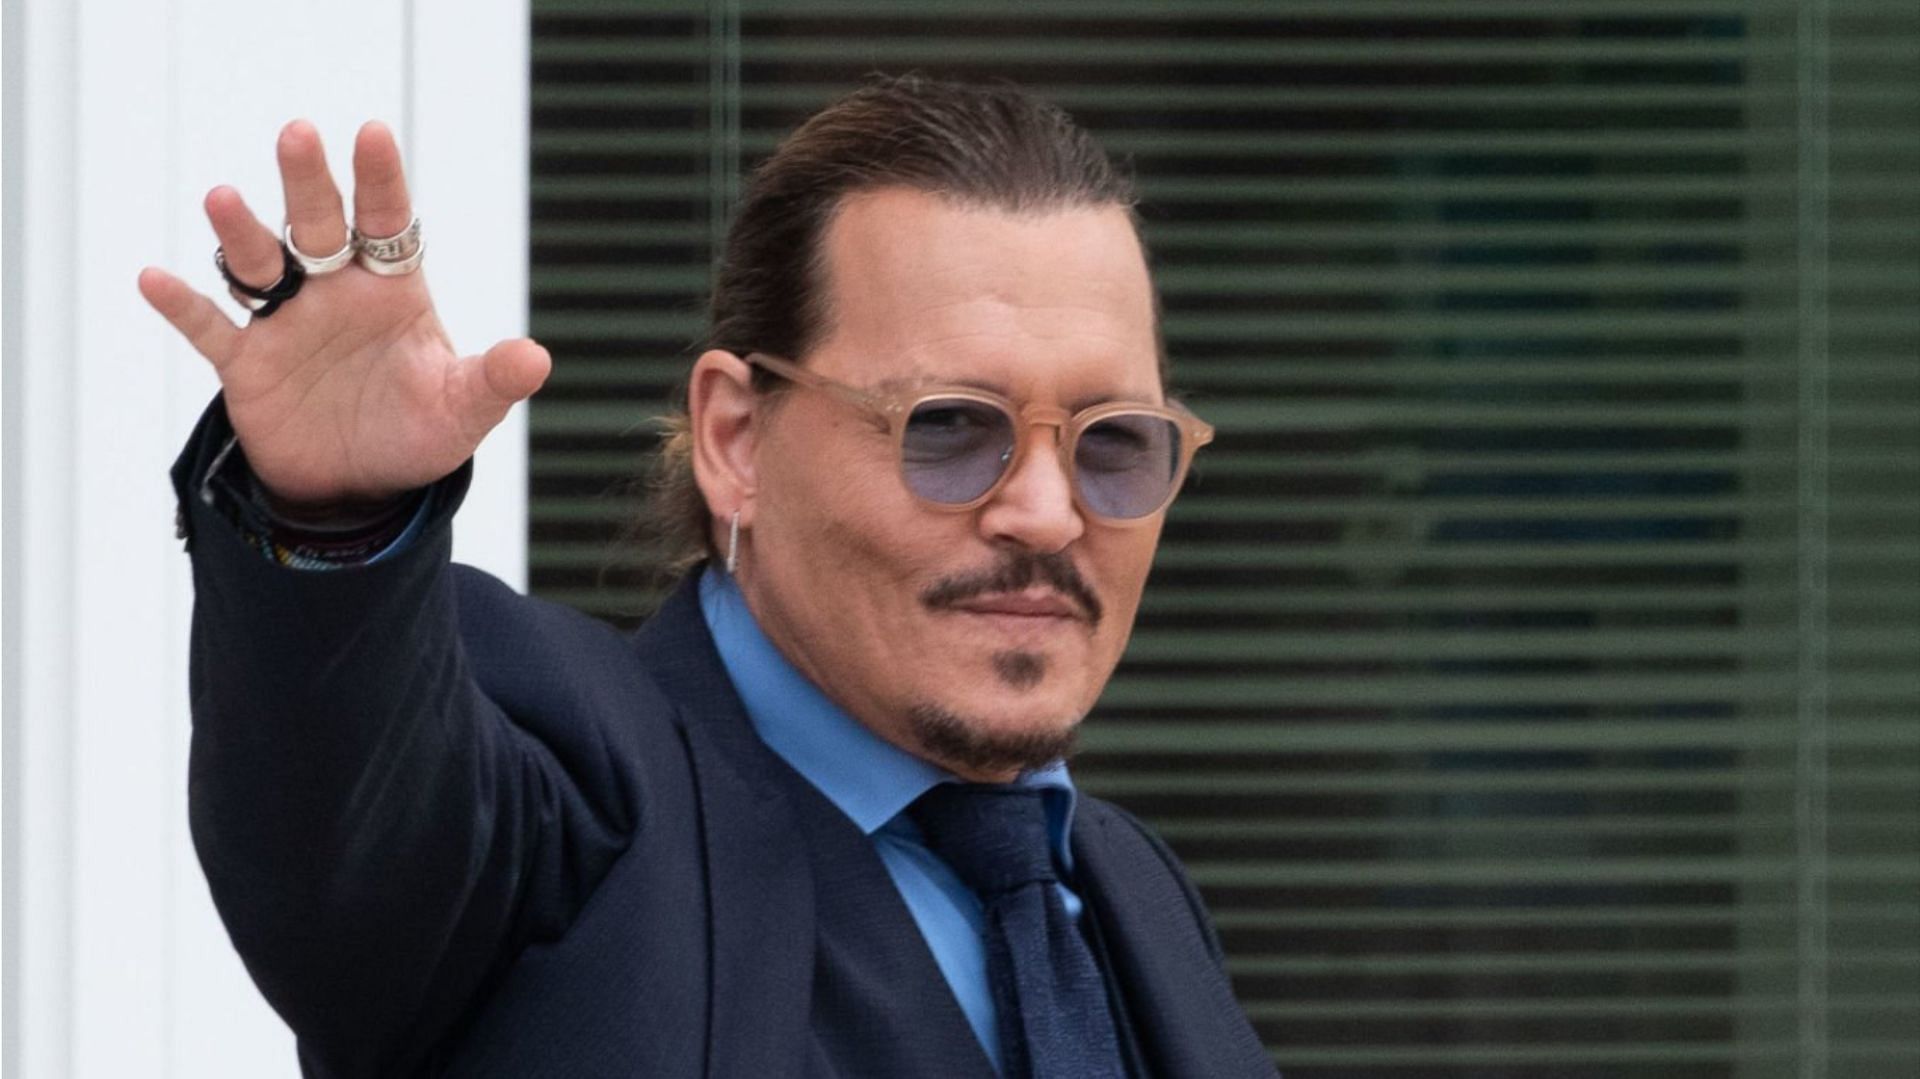 Video of Johnny Depp doing his Willy Wonka voice for a few kids in a restaurant goes viral online (Image via Cliff Owen/Getty Images)